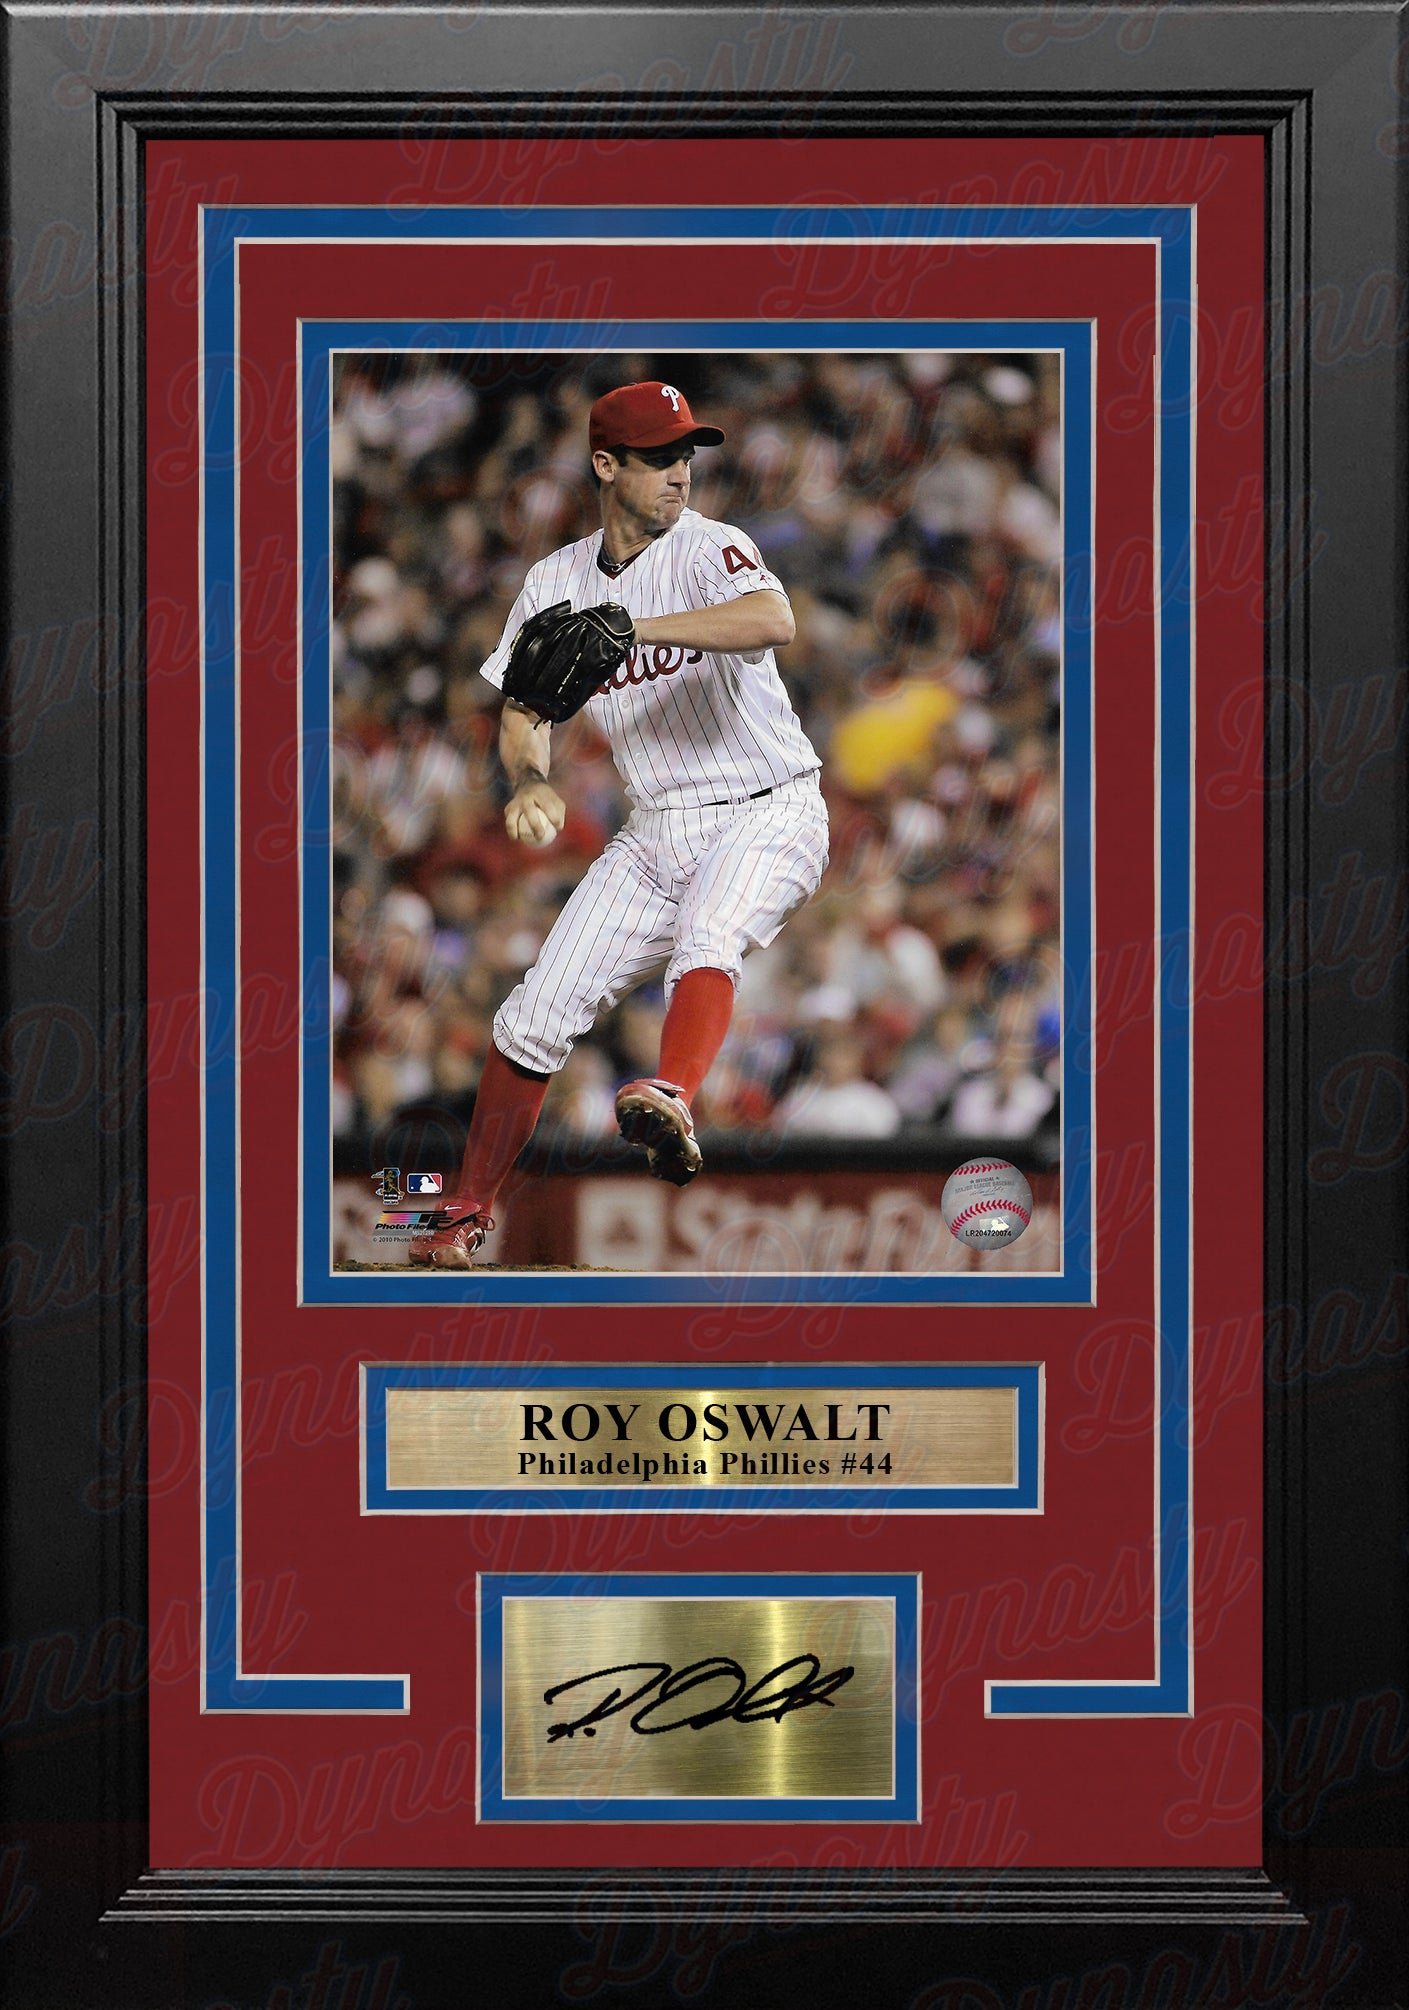 Roy Oswalt in Action Philadelphia Phillies 8 x 10 Framed Baseball Photo  with Engraved Autograph - Dynasty Sports & Framing